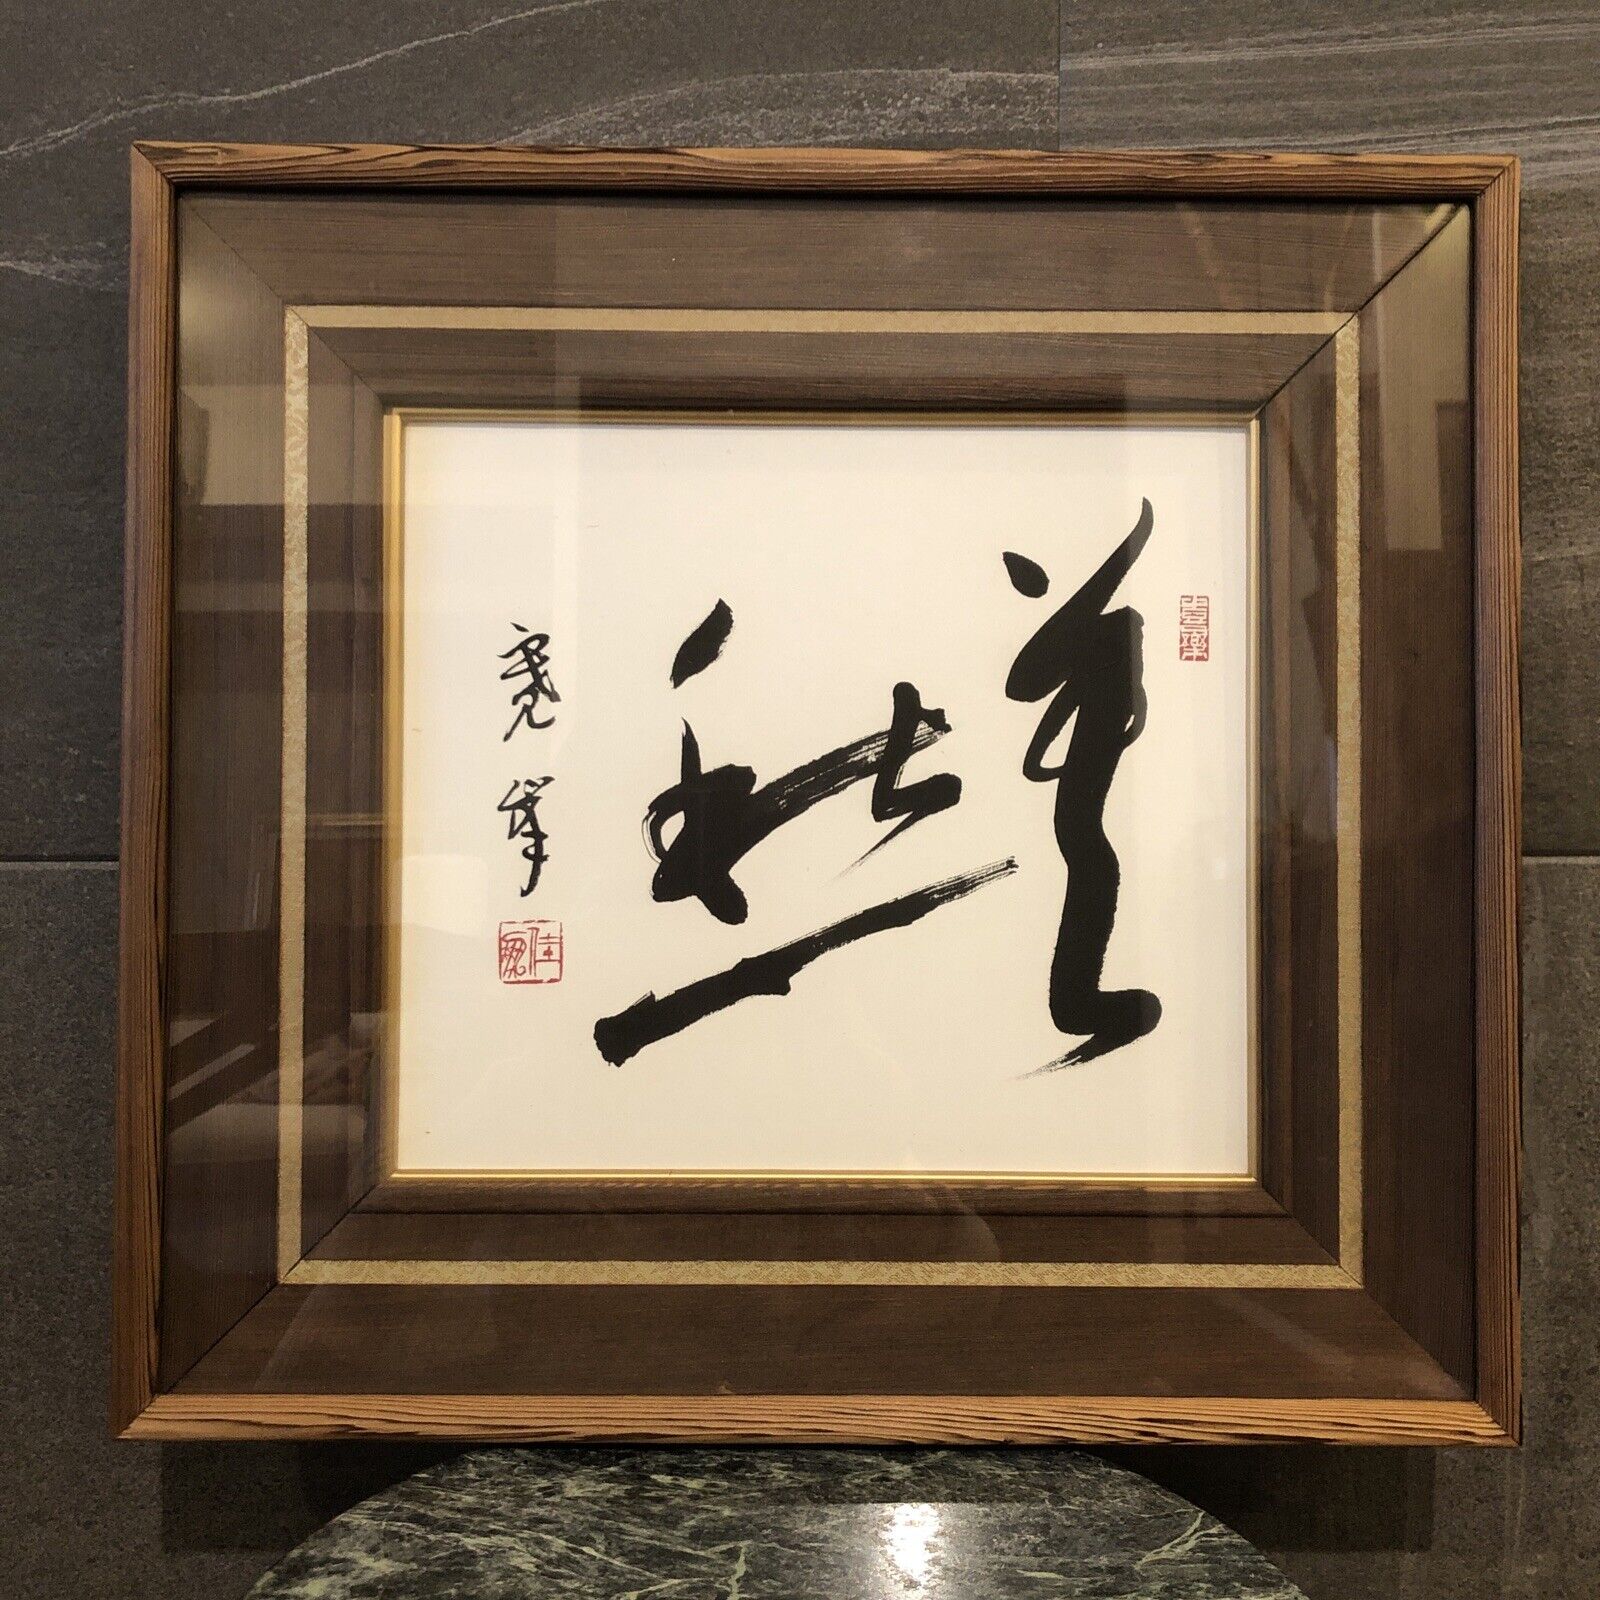 japanese art　A unique calligraphy artwork capturing the essence of the Showa era